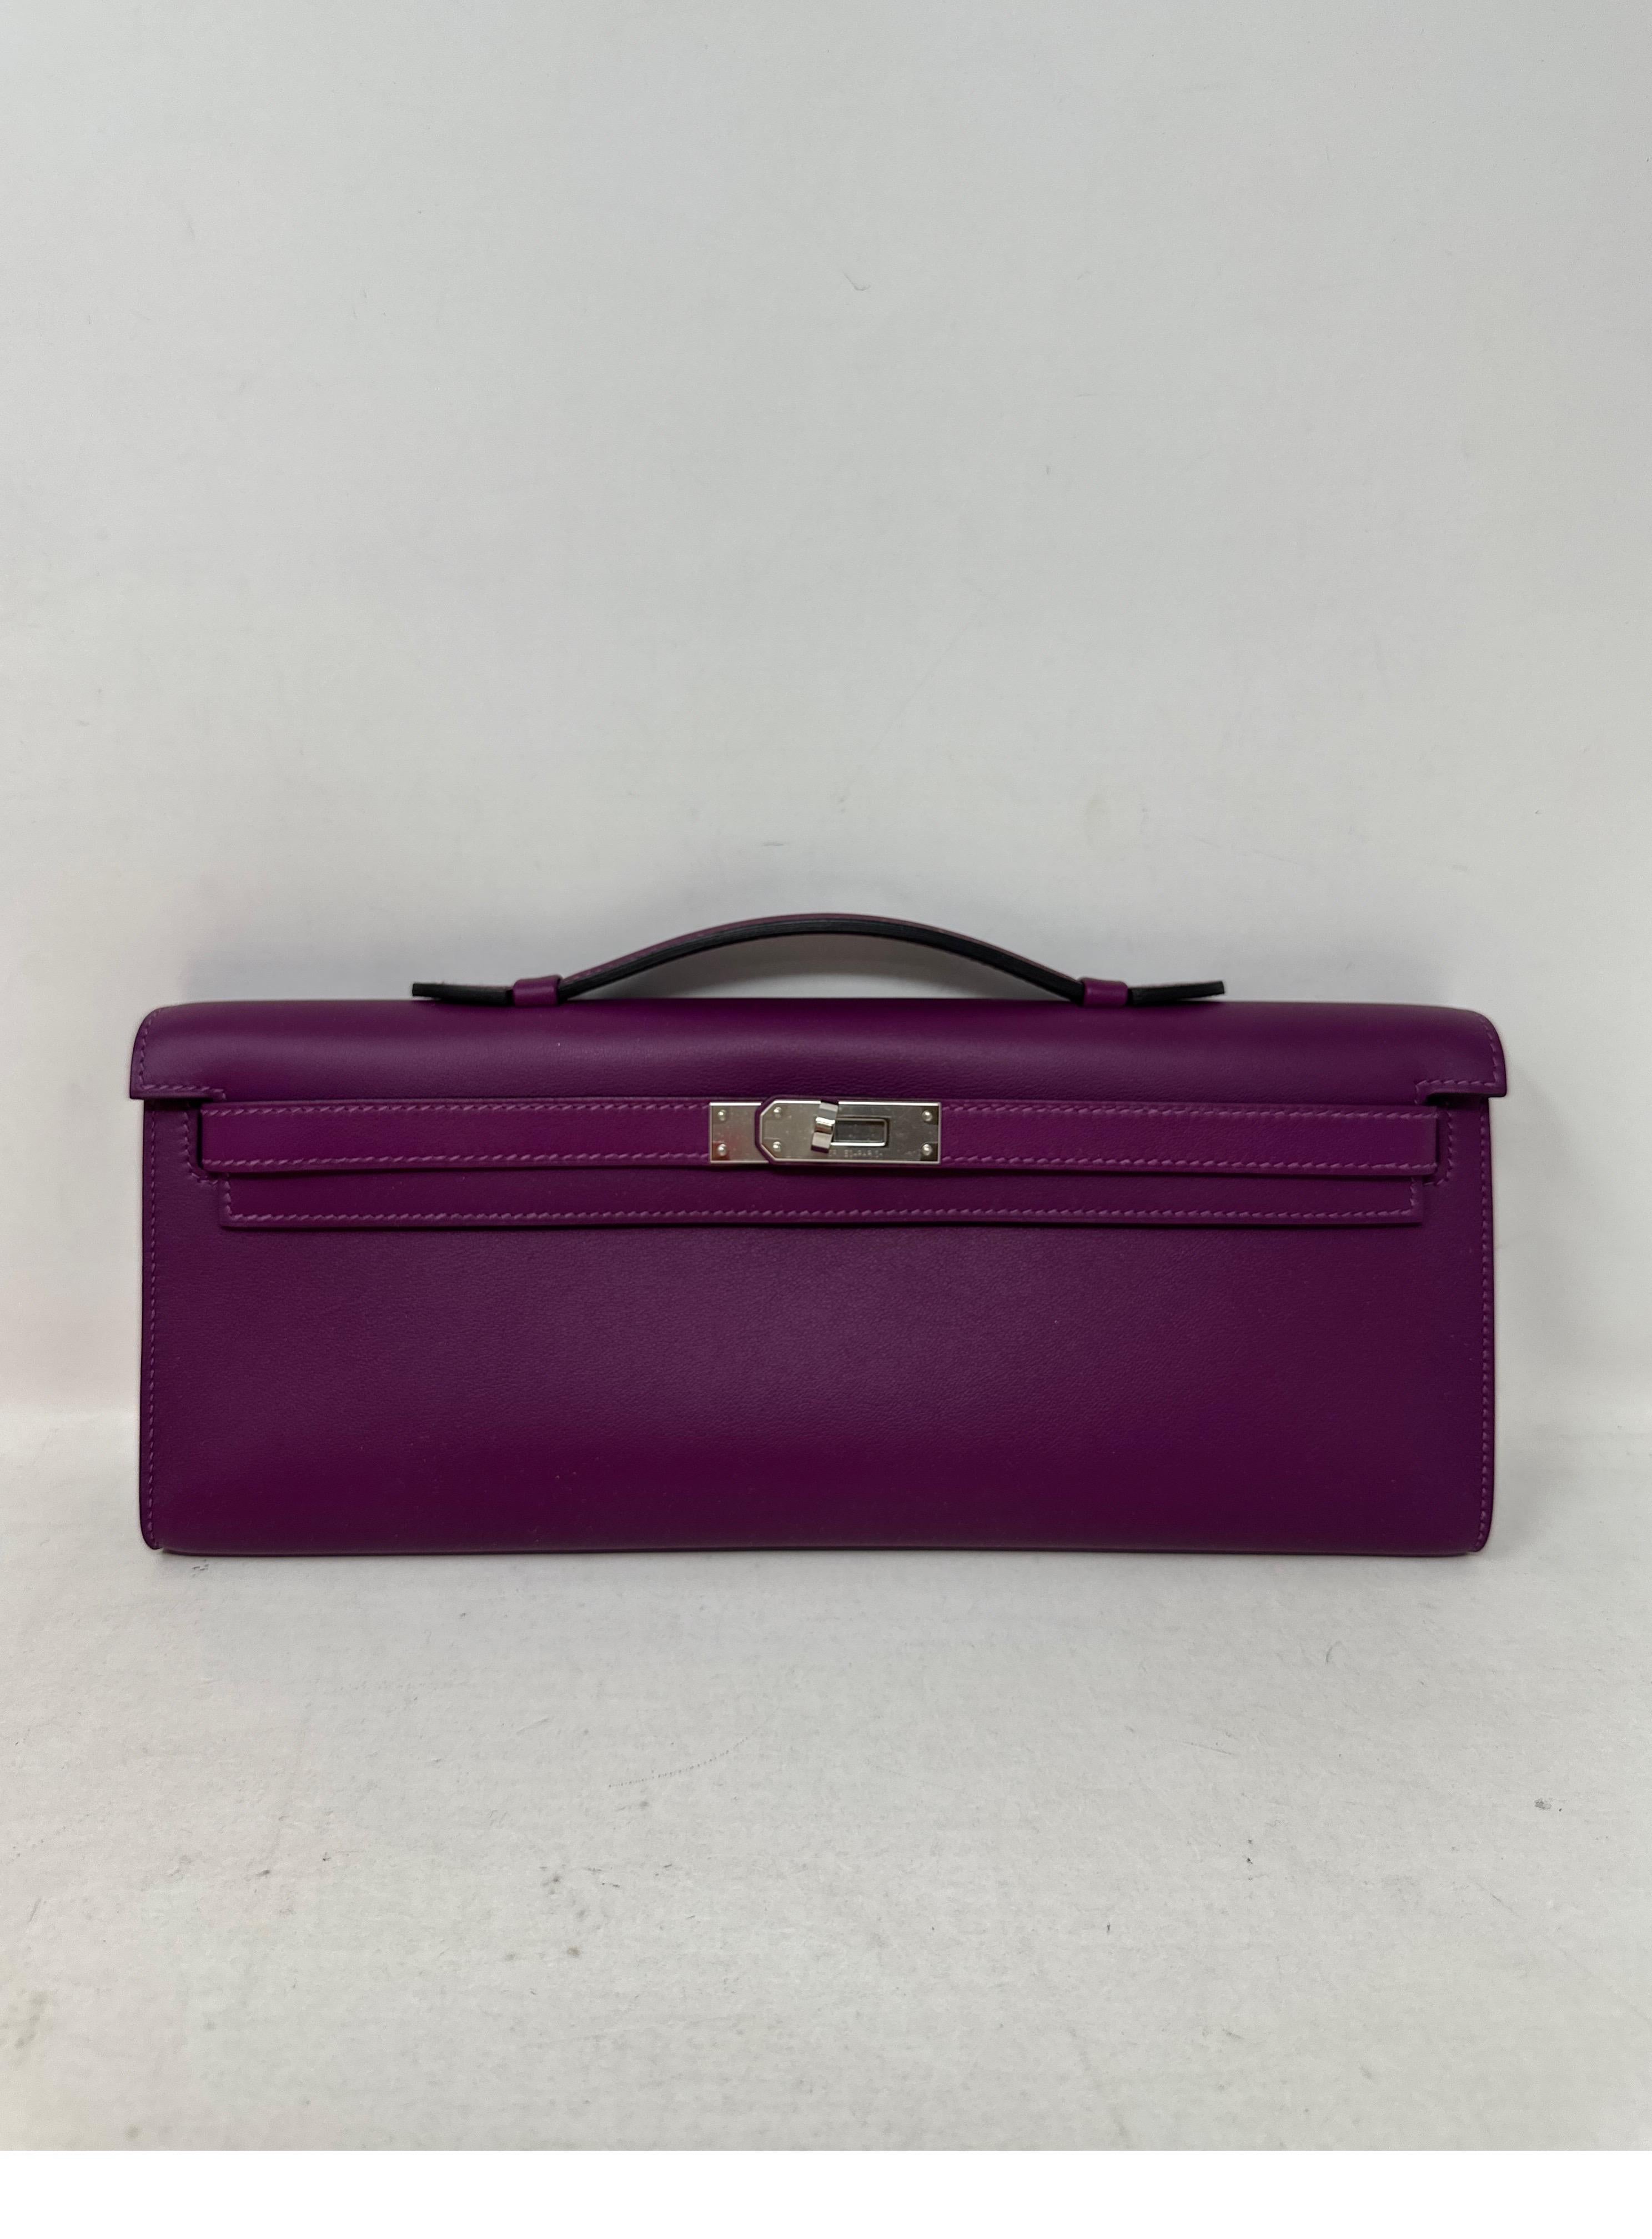 Hermes Purple Kelly Clutch Bag. Excellent condition. Looks like new. Plastic is still on the hardware. Rich purple color. Palladium silver hardware. Retired Kelly clutch. Great investment bag. Includes original box and dust bag. Guaranteed